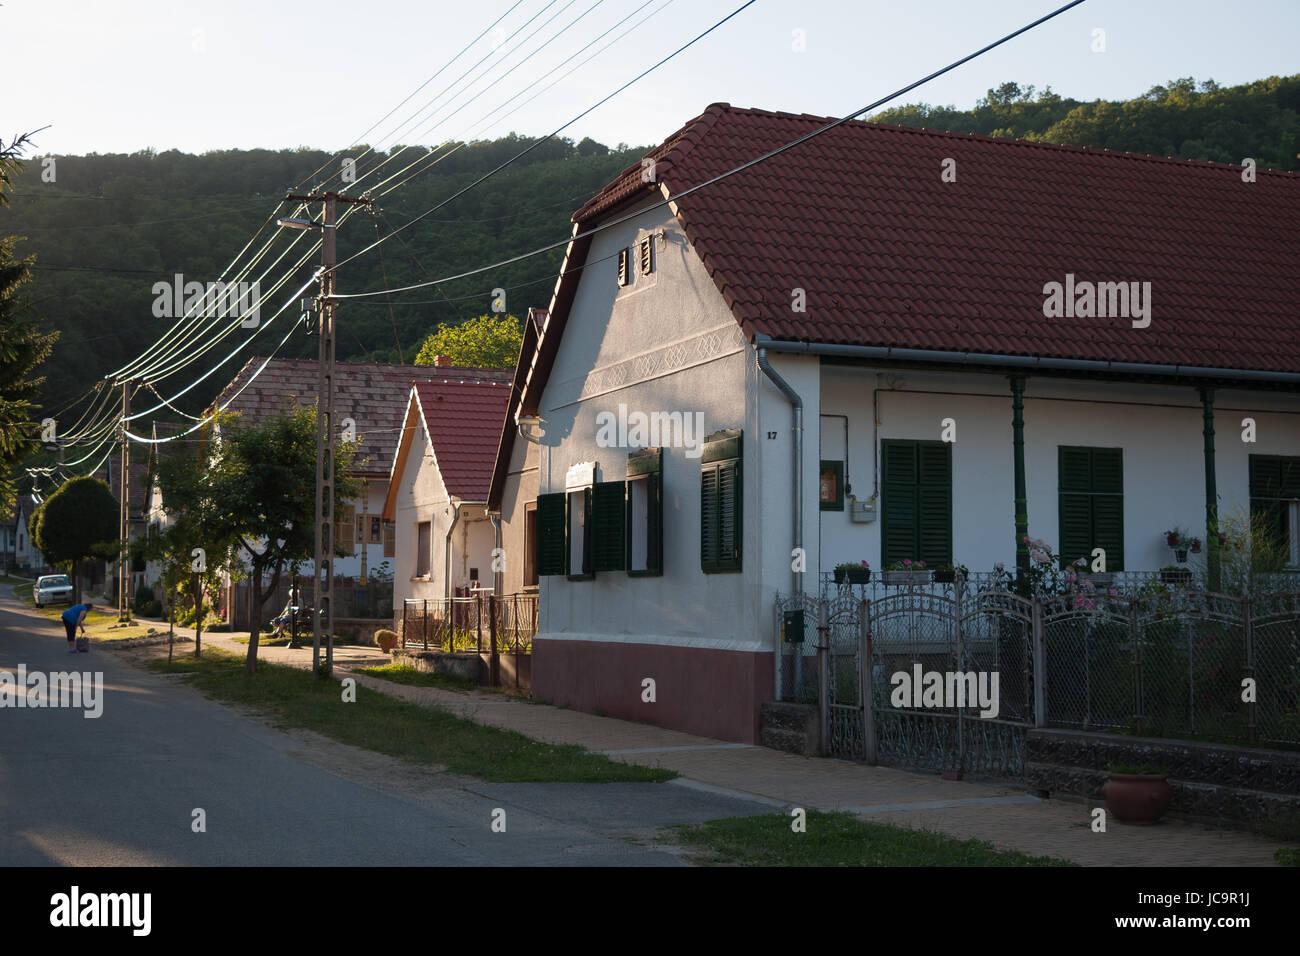 German pottery village in Hungary Stock Photo